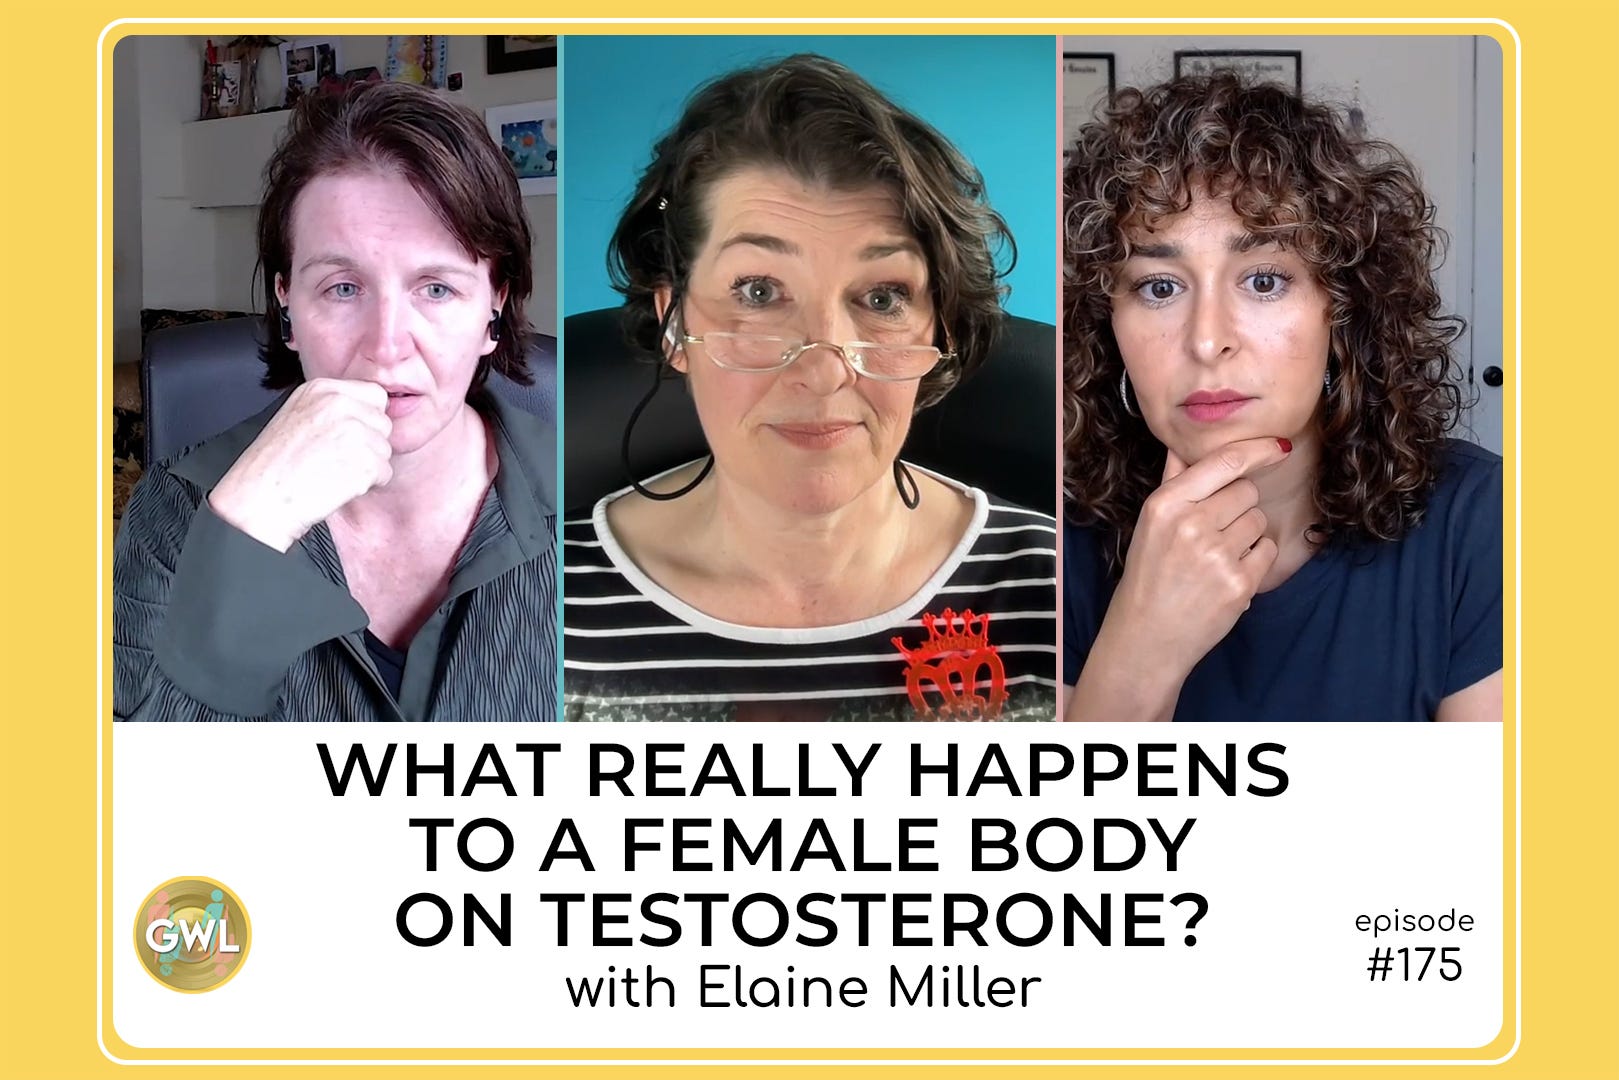 175 - What Really Happens to a Female Body on Testosterone? with Elaine Miller